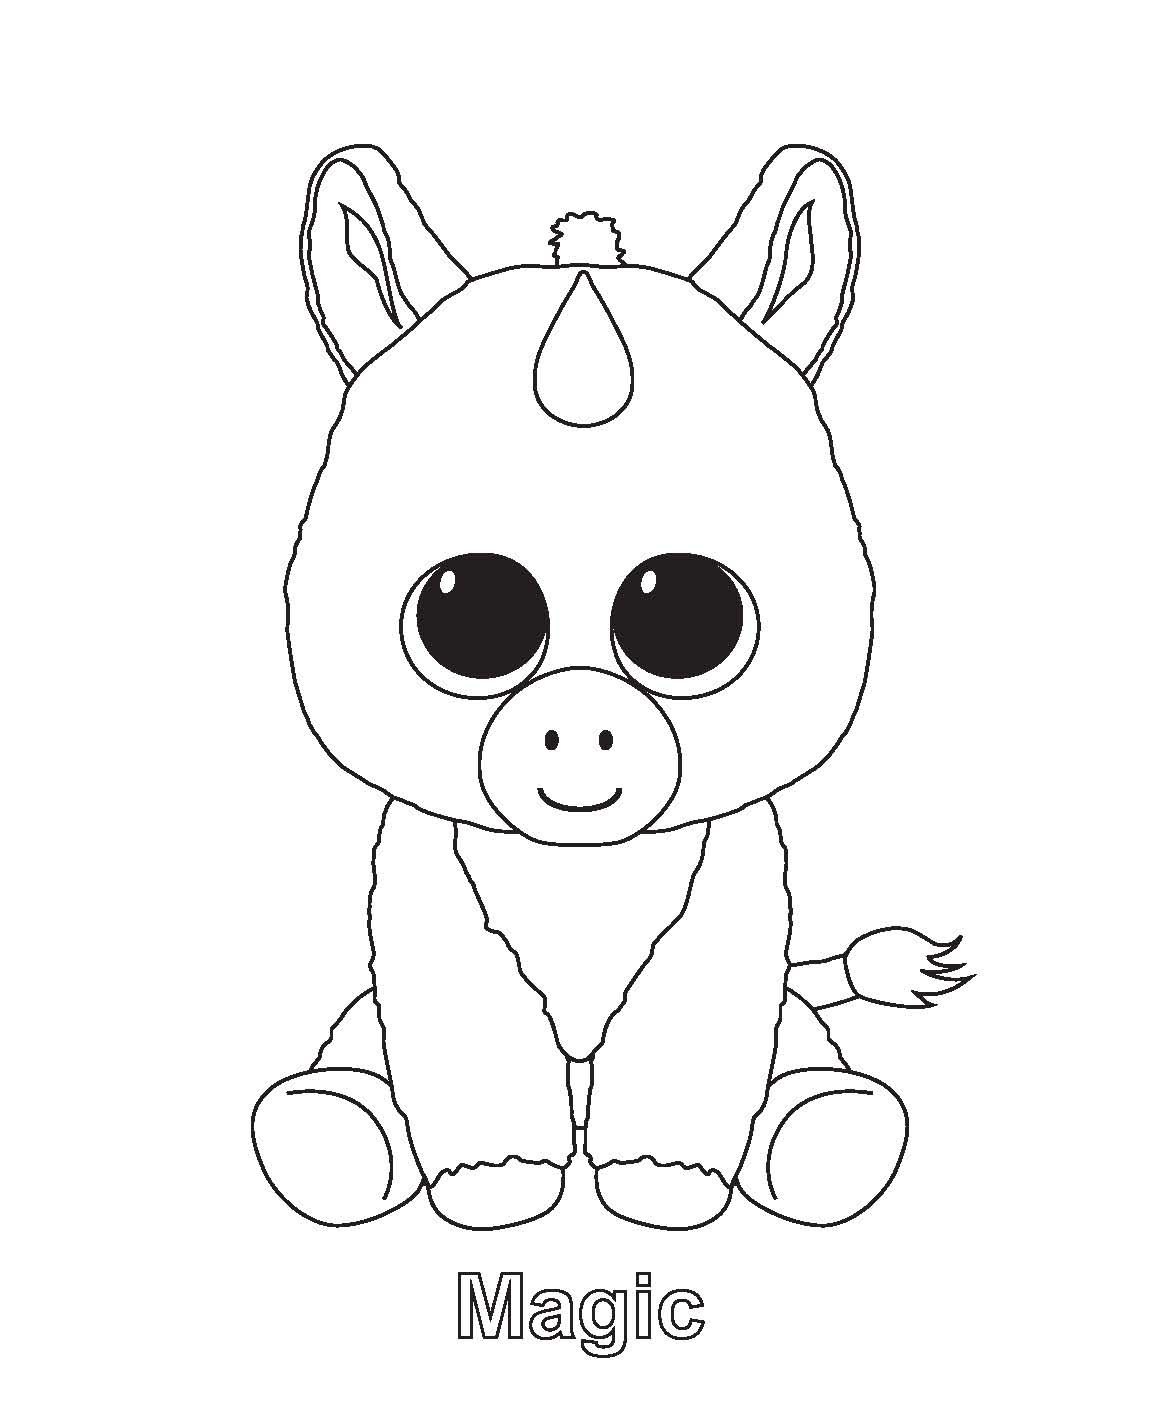 Ty Beanie Boo Coloring Pages Download And Print For Free | C&amp;#039;s Pet - Free Printable Beanie Boo Coloring Pages